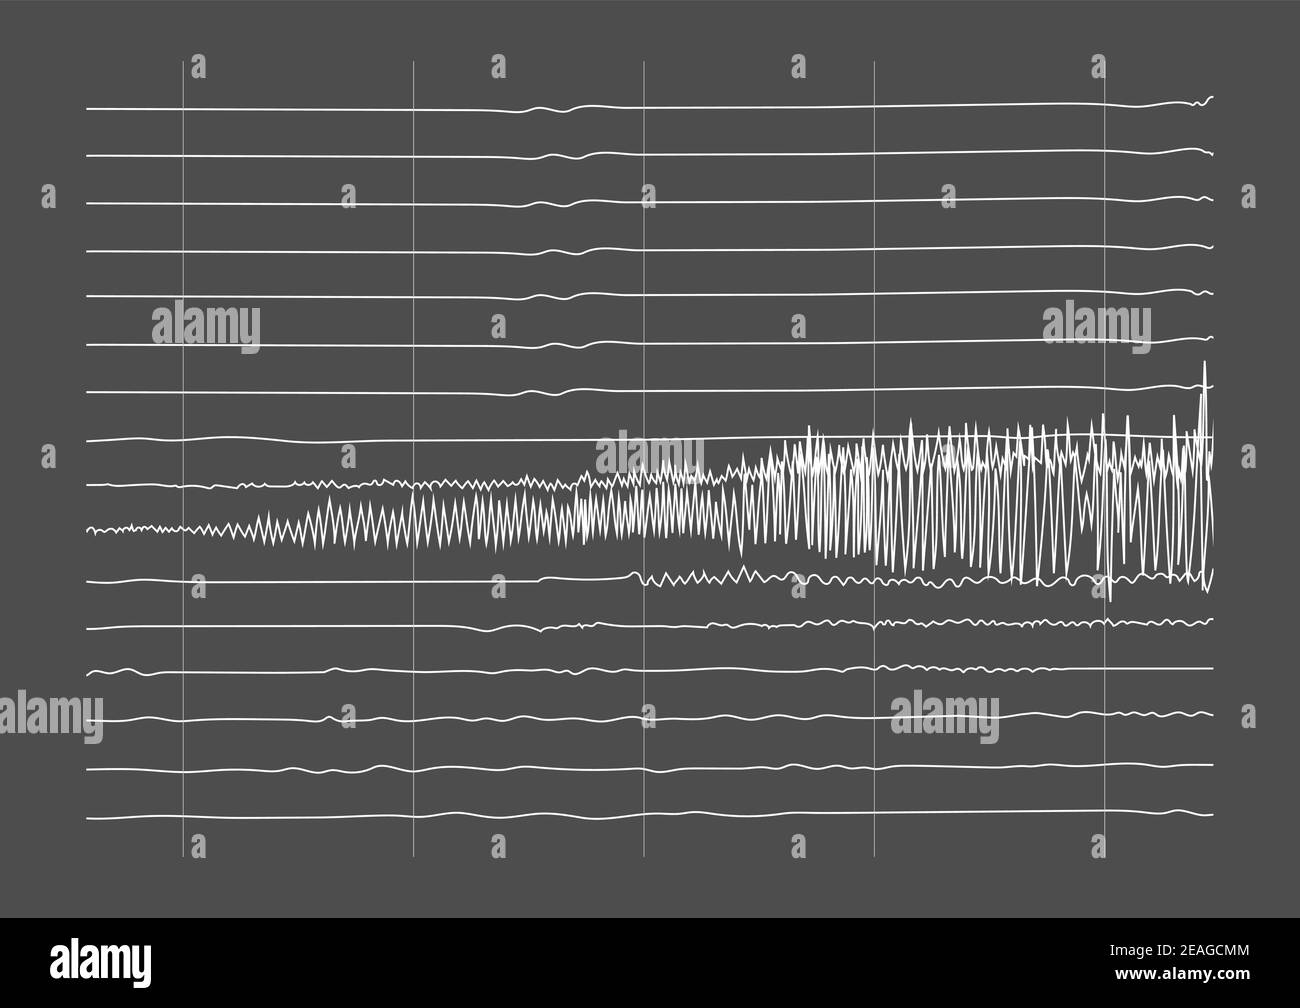 Illustration of ictal EEG recording during seizure. Seizure waves showing high amplitudes and frequency. Stock Vector